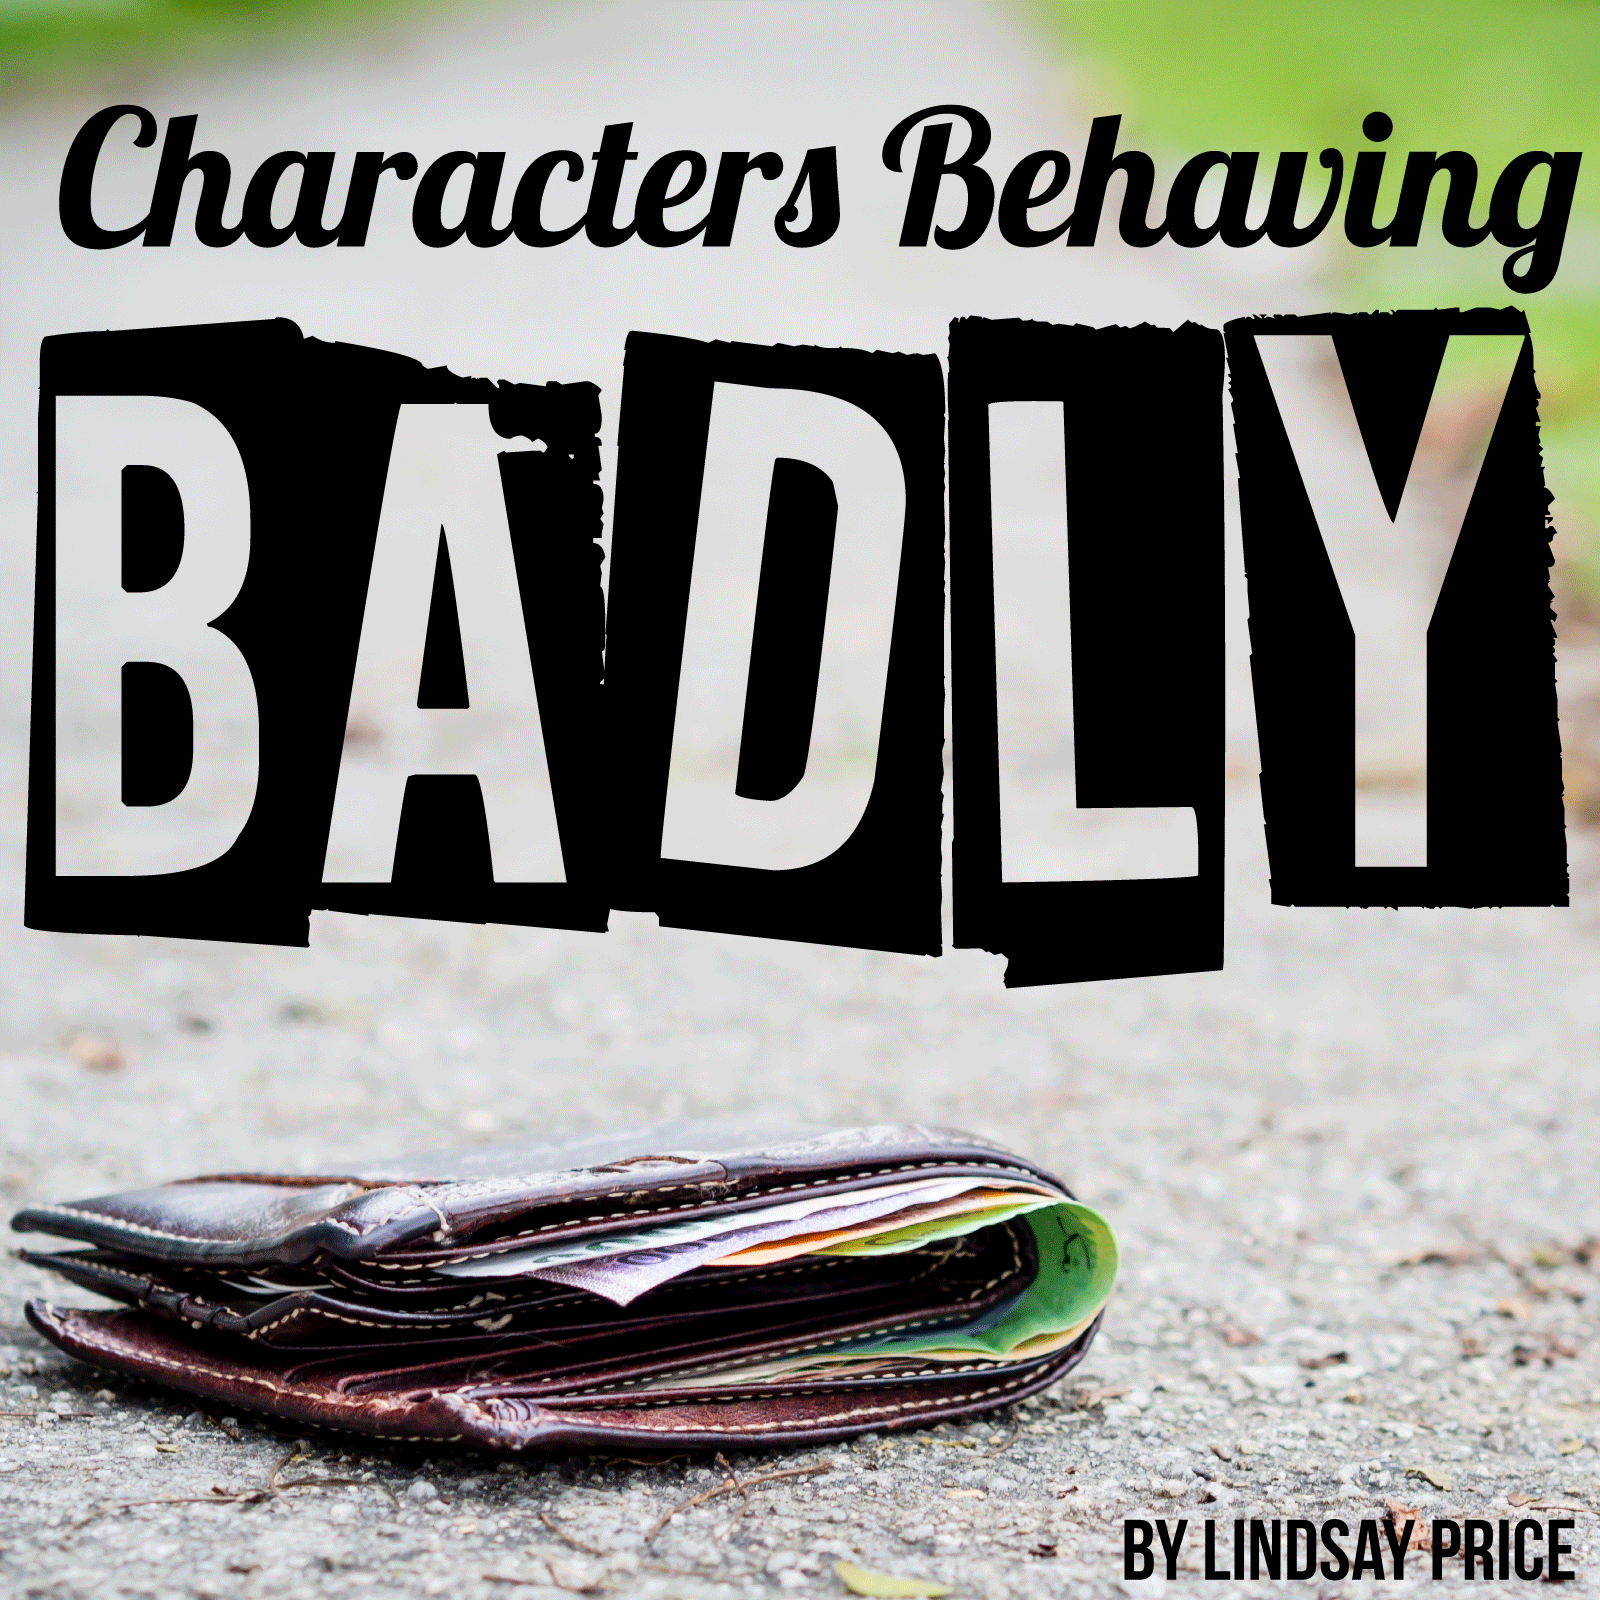 Characters Behaving Badly